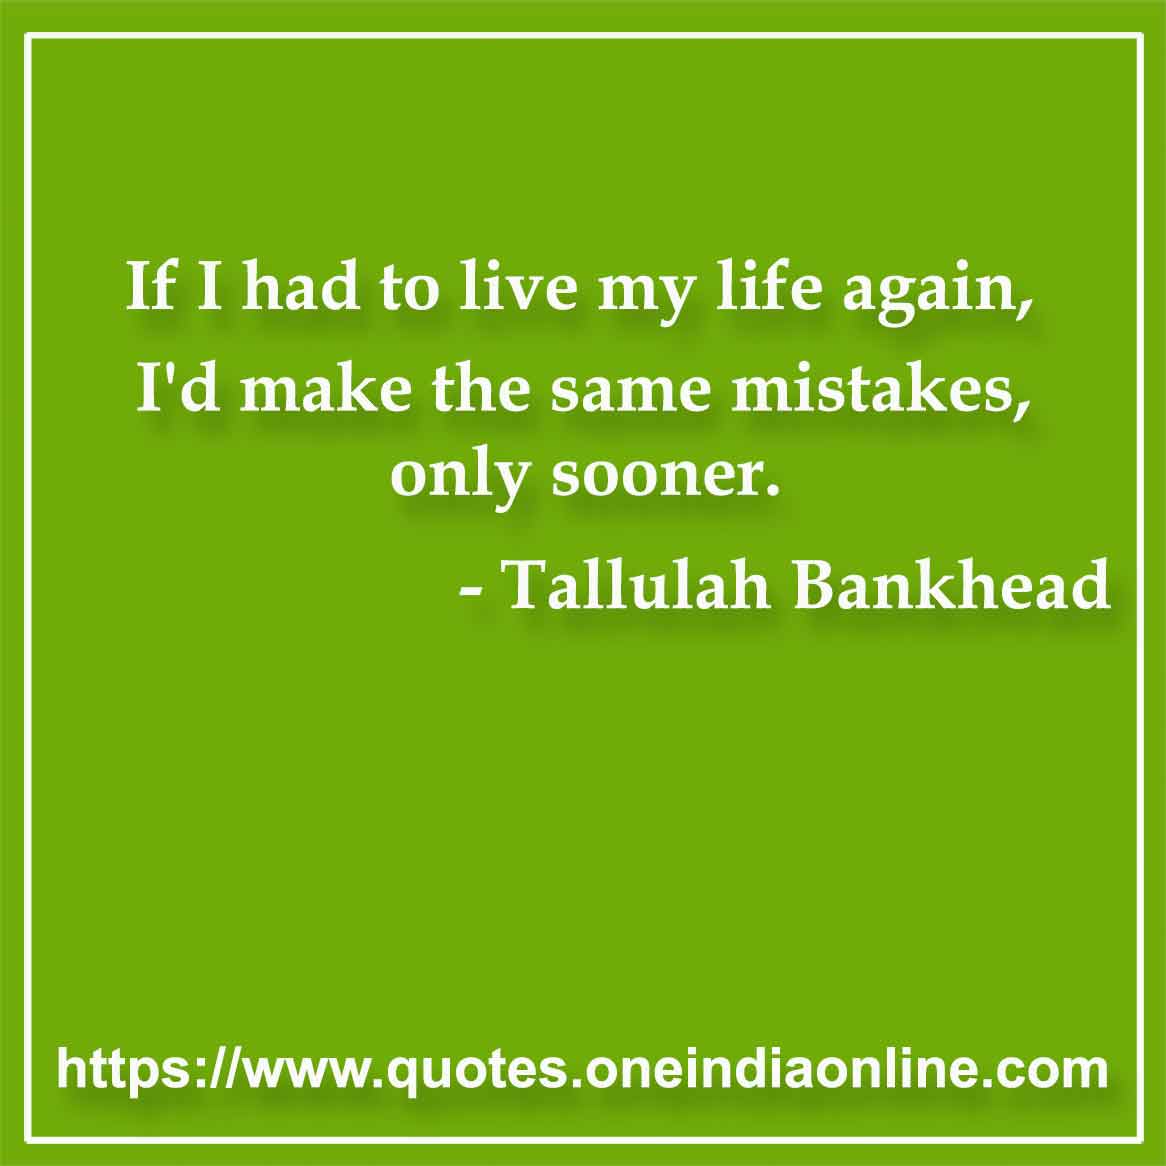 If I had to live my life again, I'd make the same mistakes, only sooner.

- Tallulah Bankhead Quotes